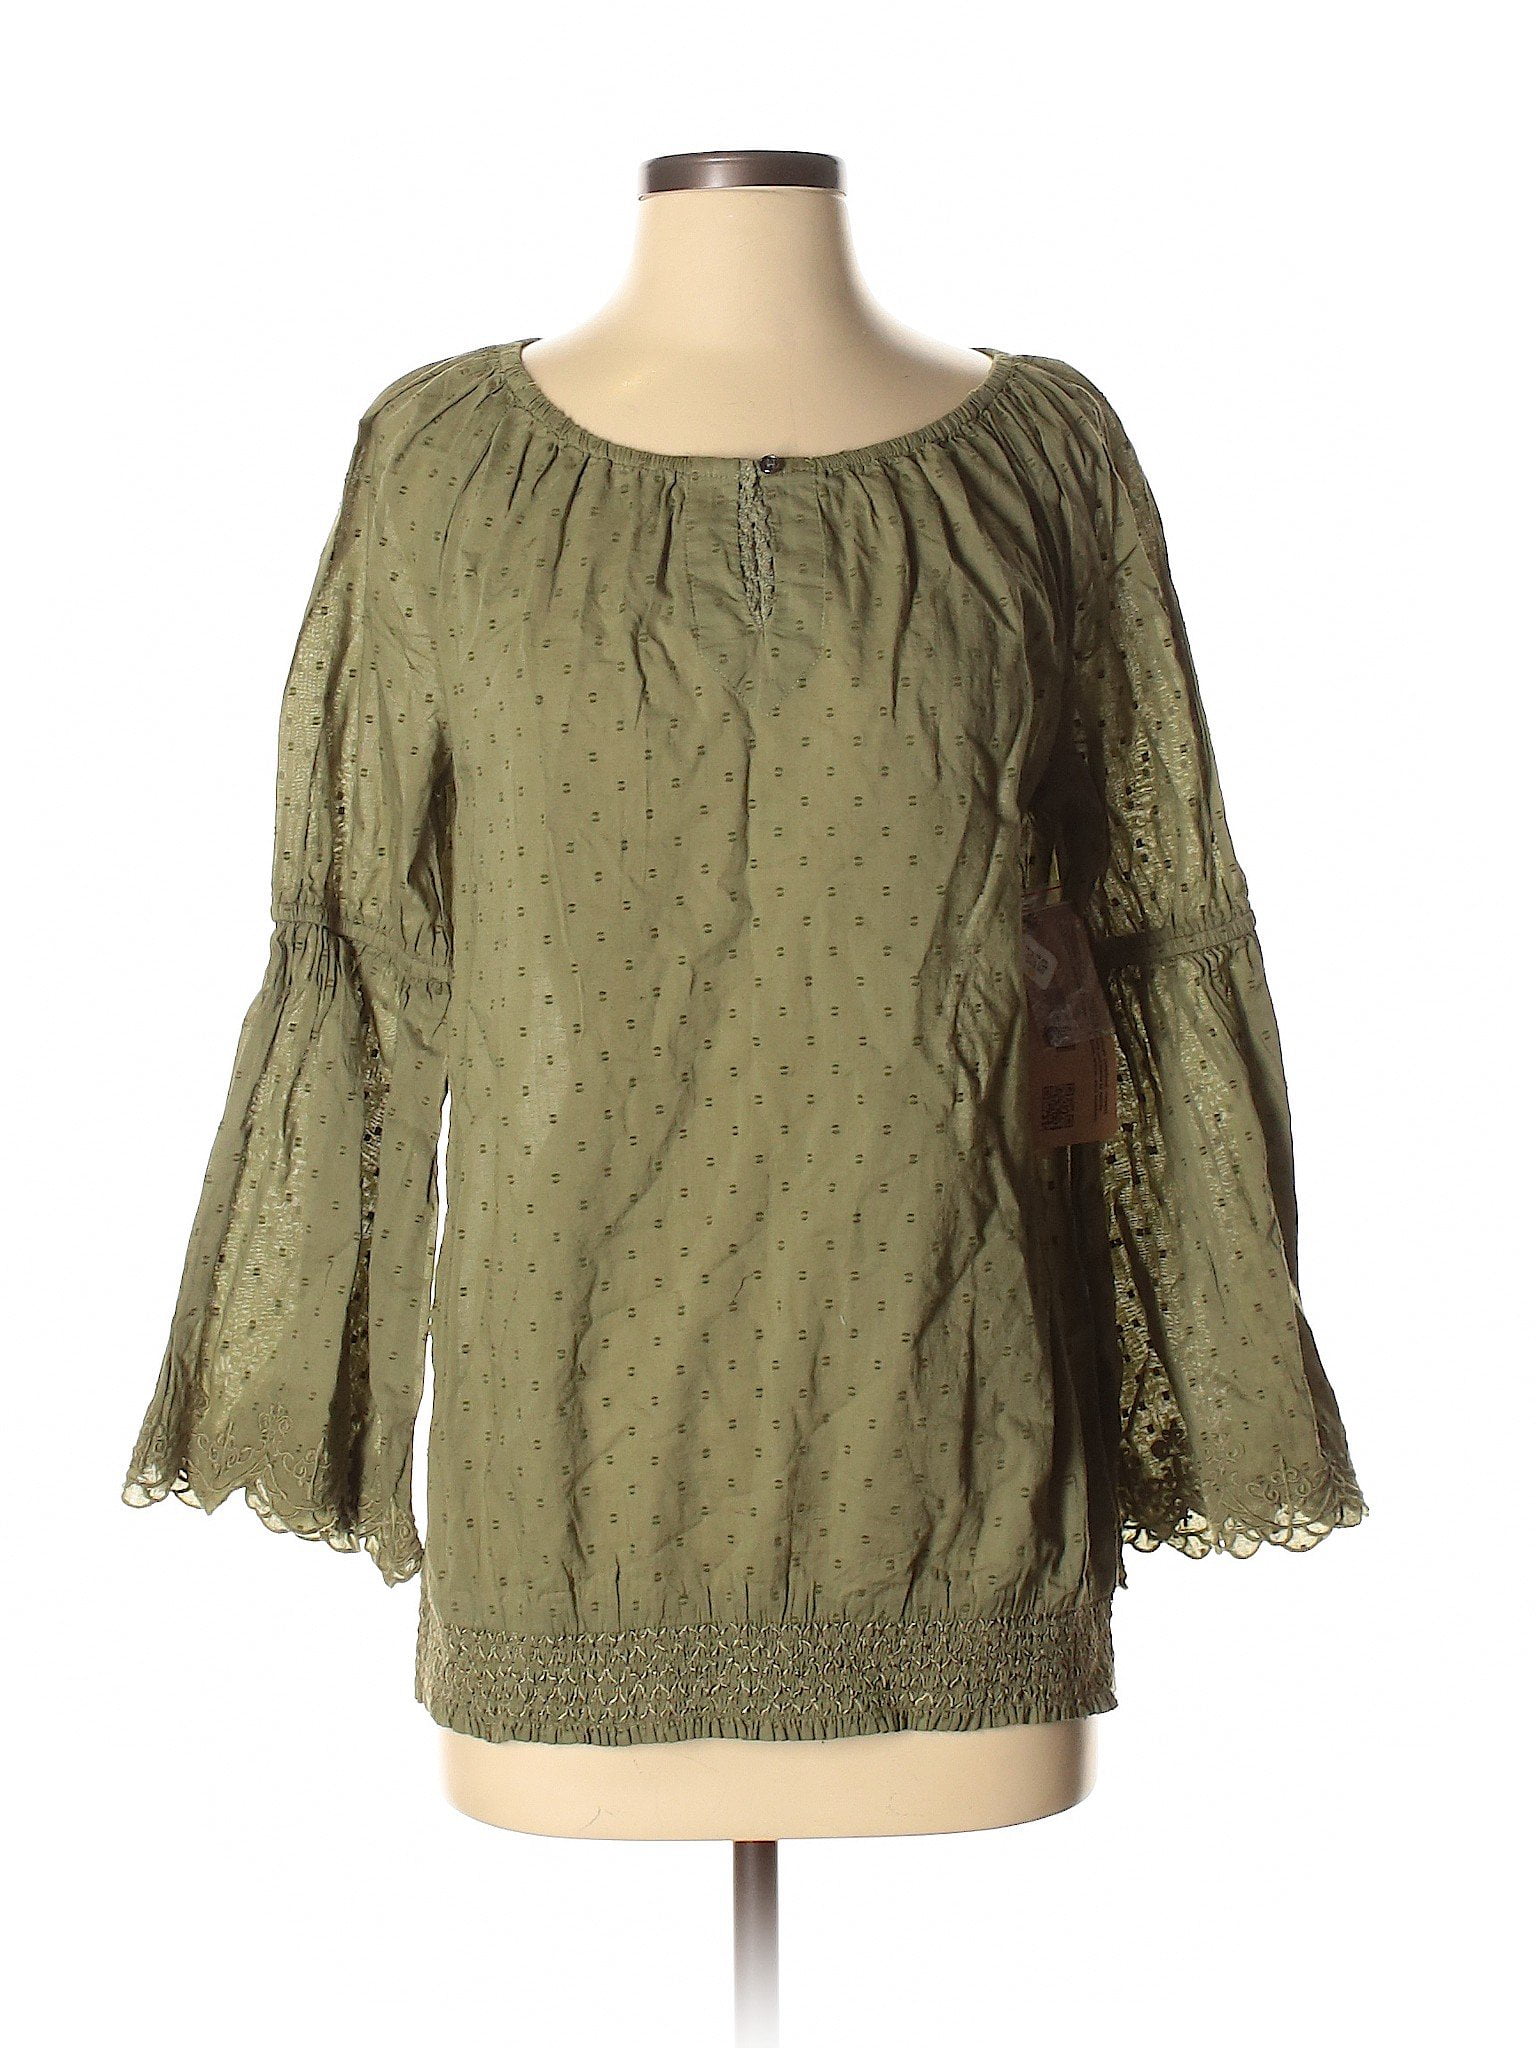 Ruff Hewn - Pre-Owned Ruff Hewn Women's Size S 3/4 Sleeve Blouse ...